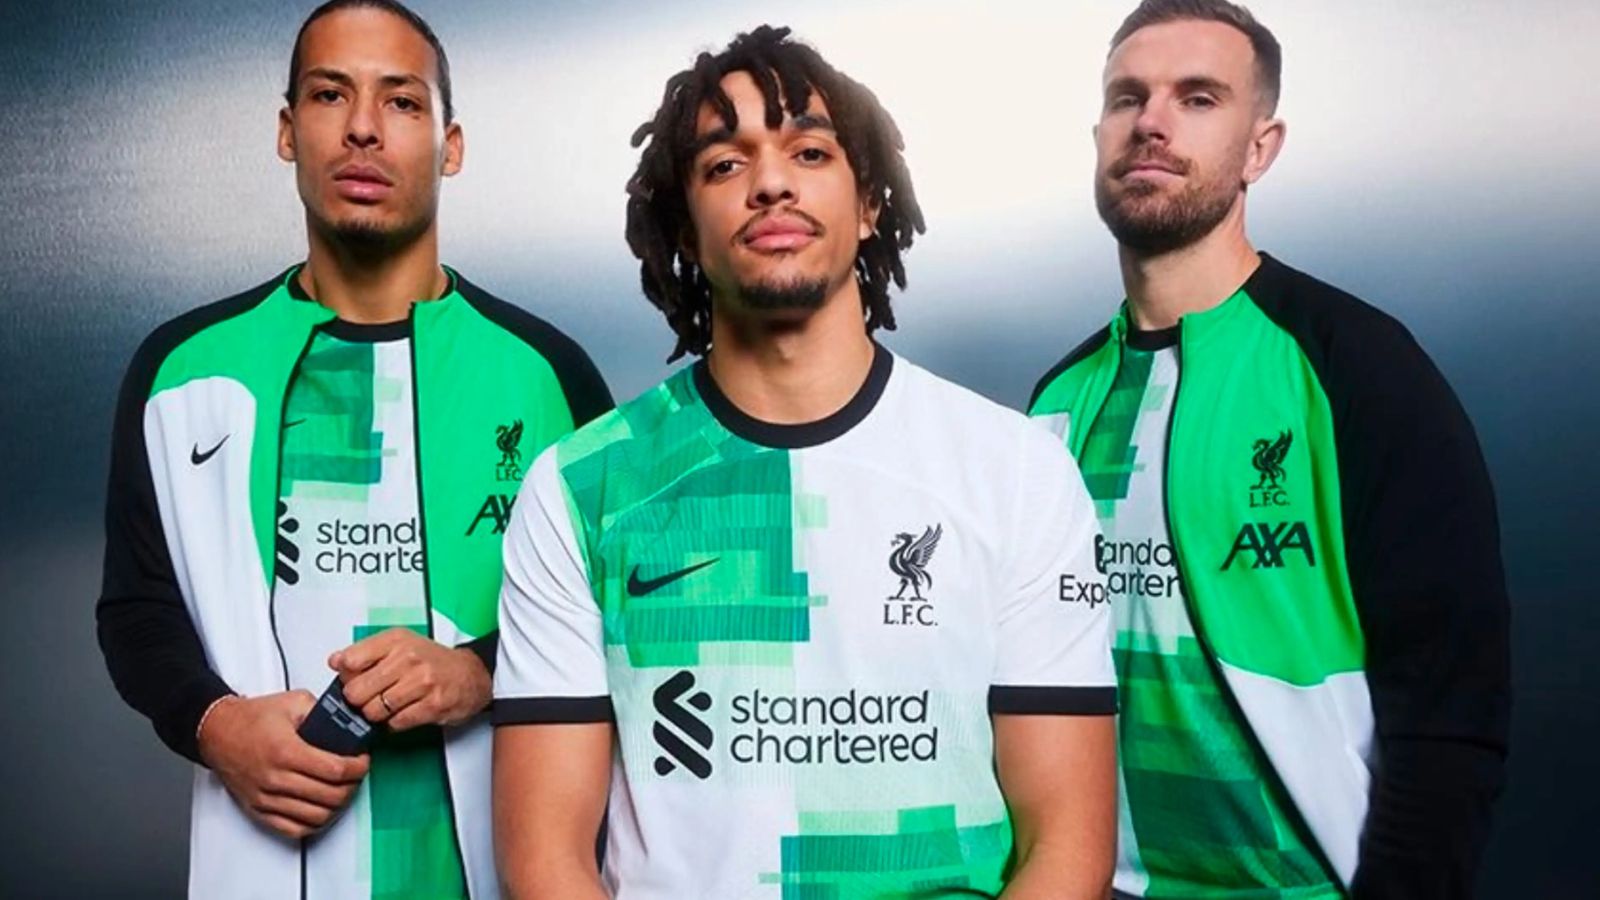 Liverpool Nike Away Kit product image of van Dijk, Alexander-Arnold, and Henderson wearing white kits featuring a green chequered pattern and black collars.